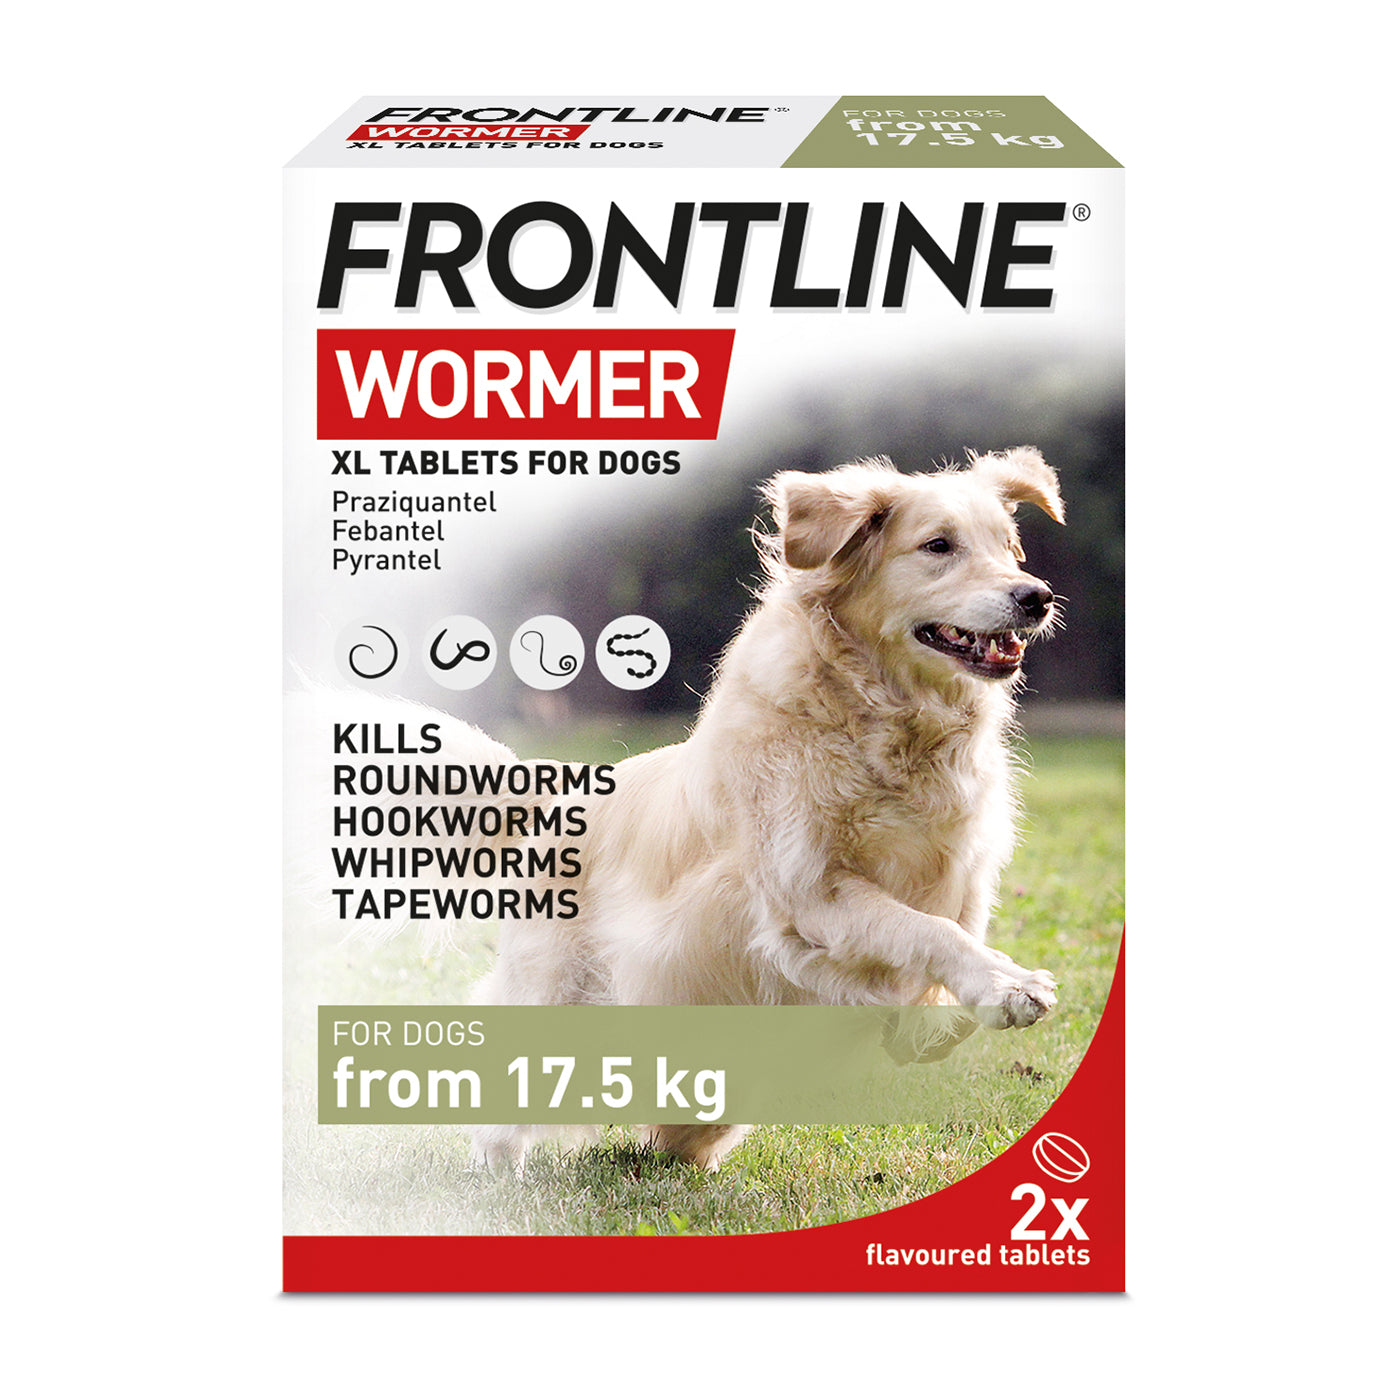 Frontline Wormer XL Tablets for Dogs x2